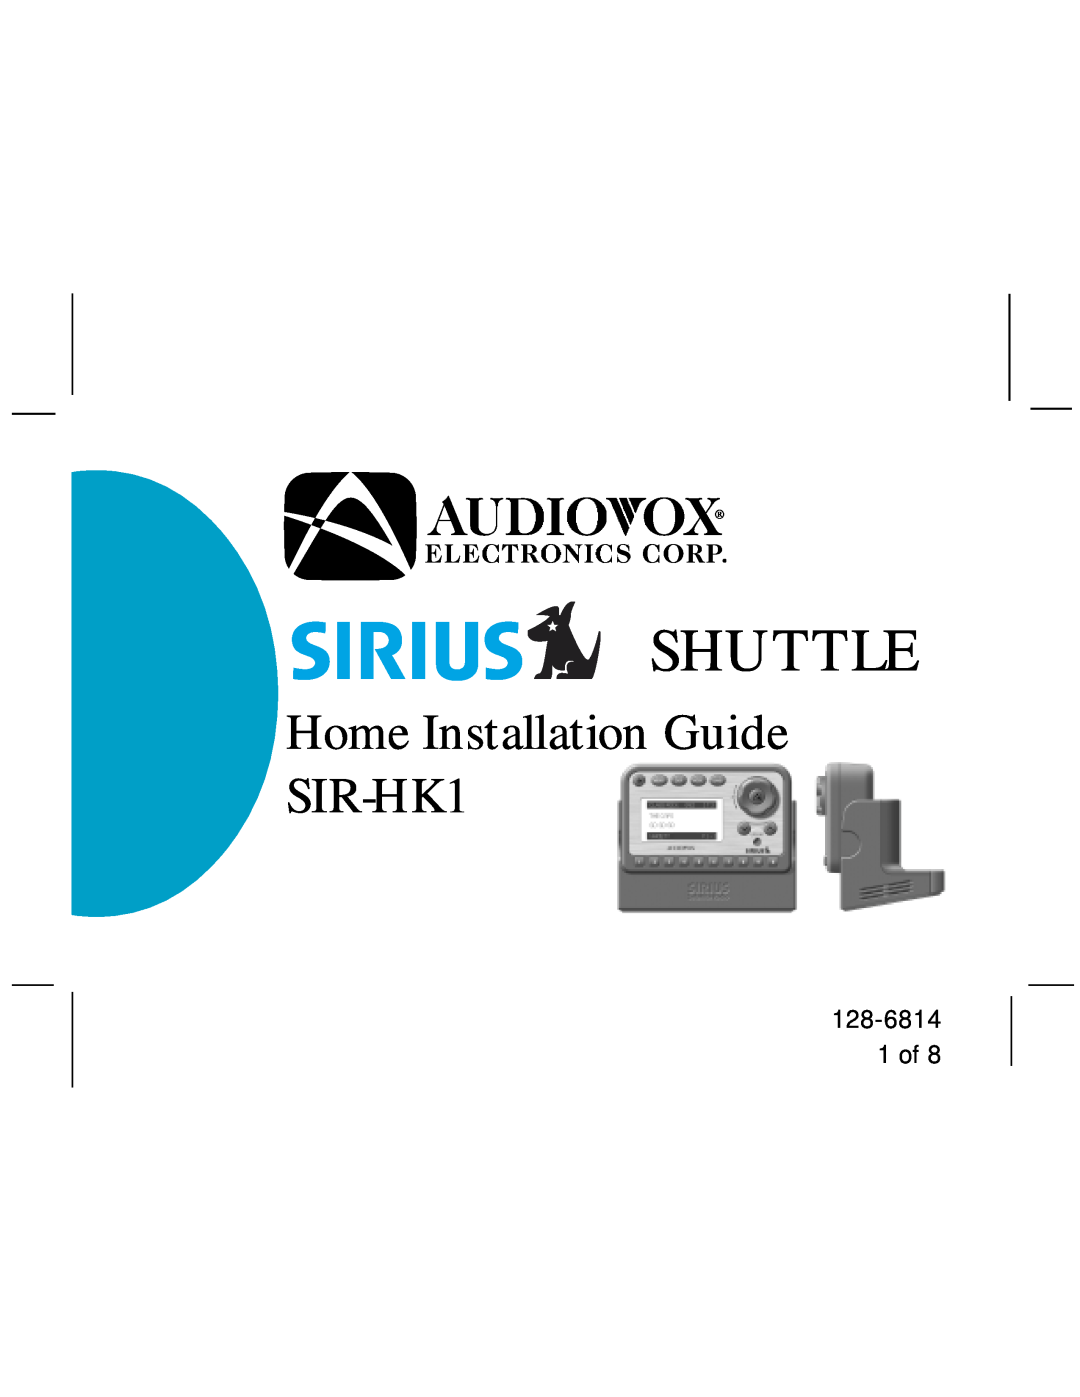 Audiovox manual 128-6814 1 of, Shuttle, Home Installation Guide SIR-HK1 